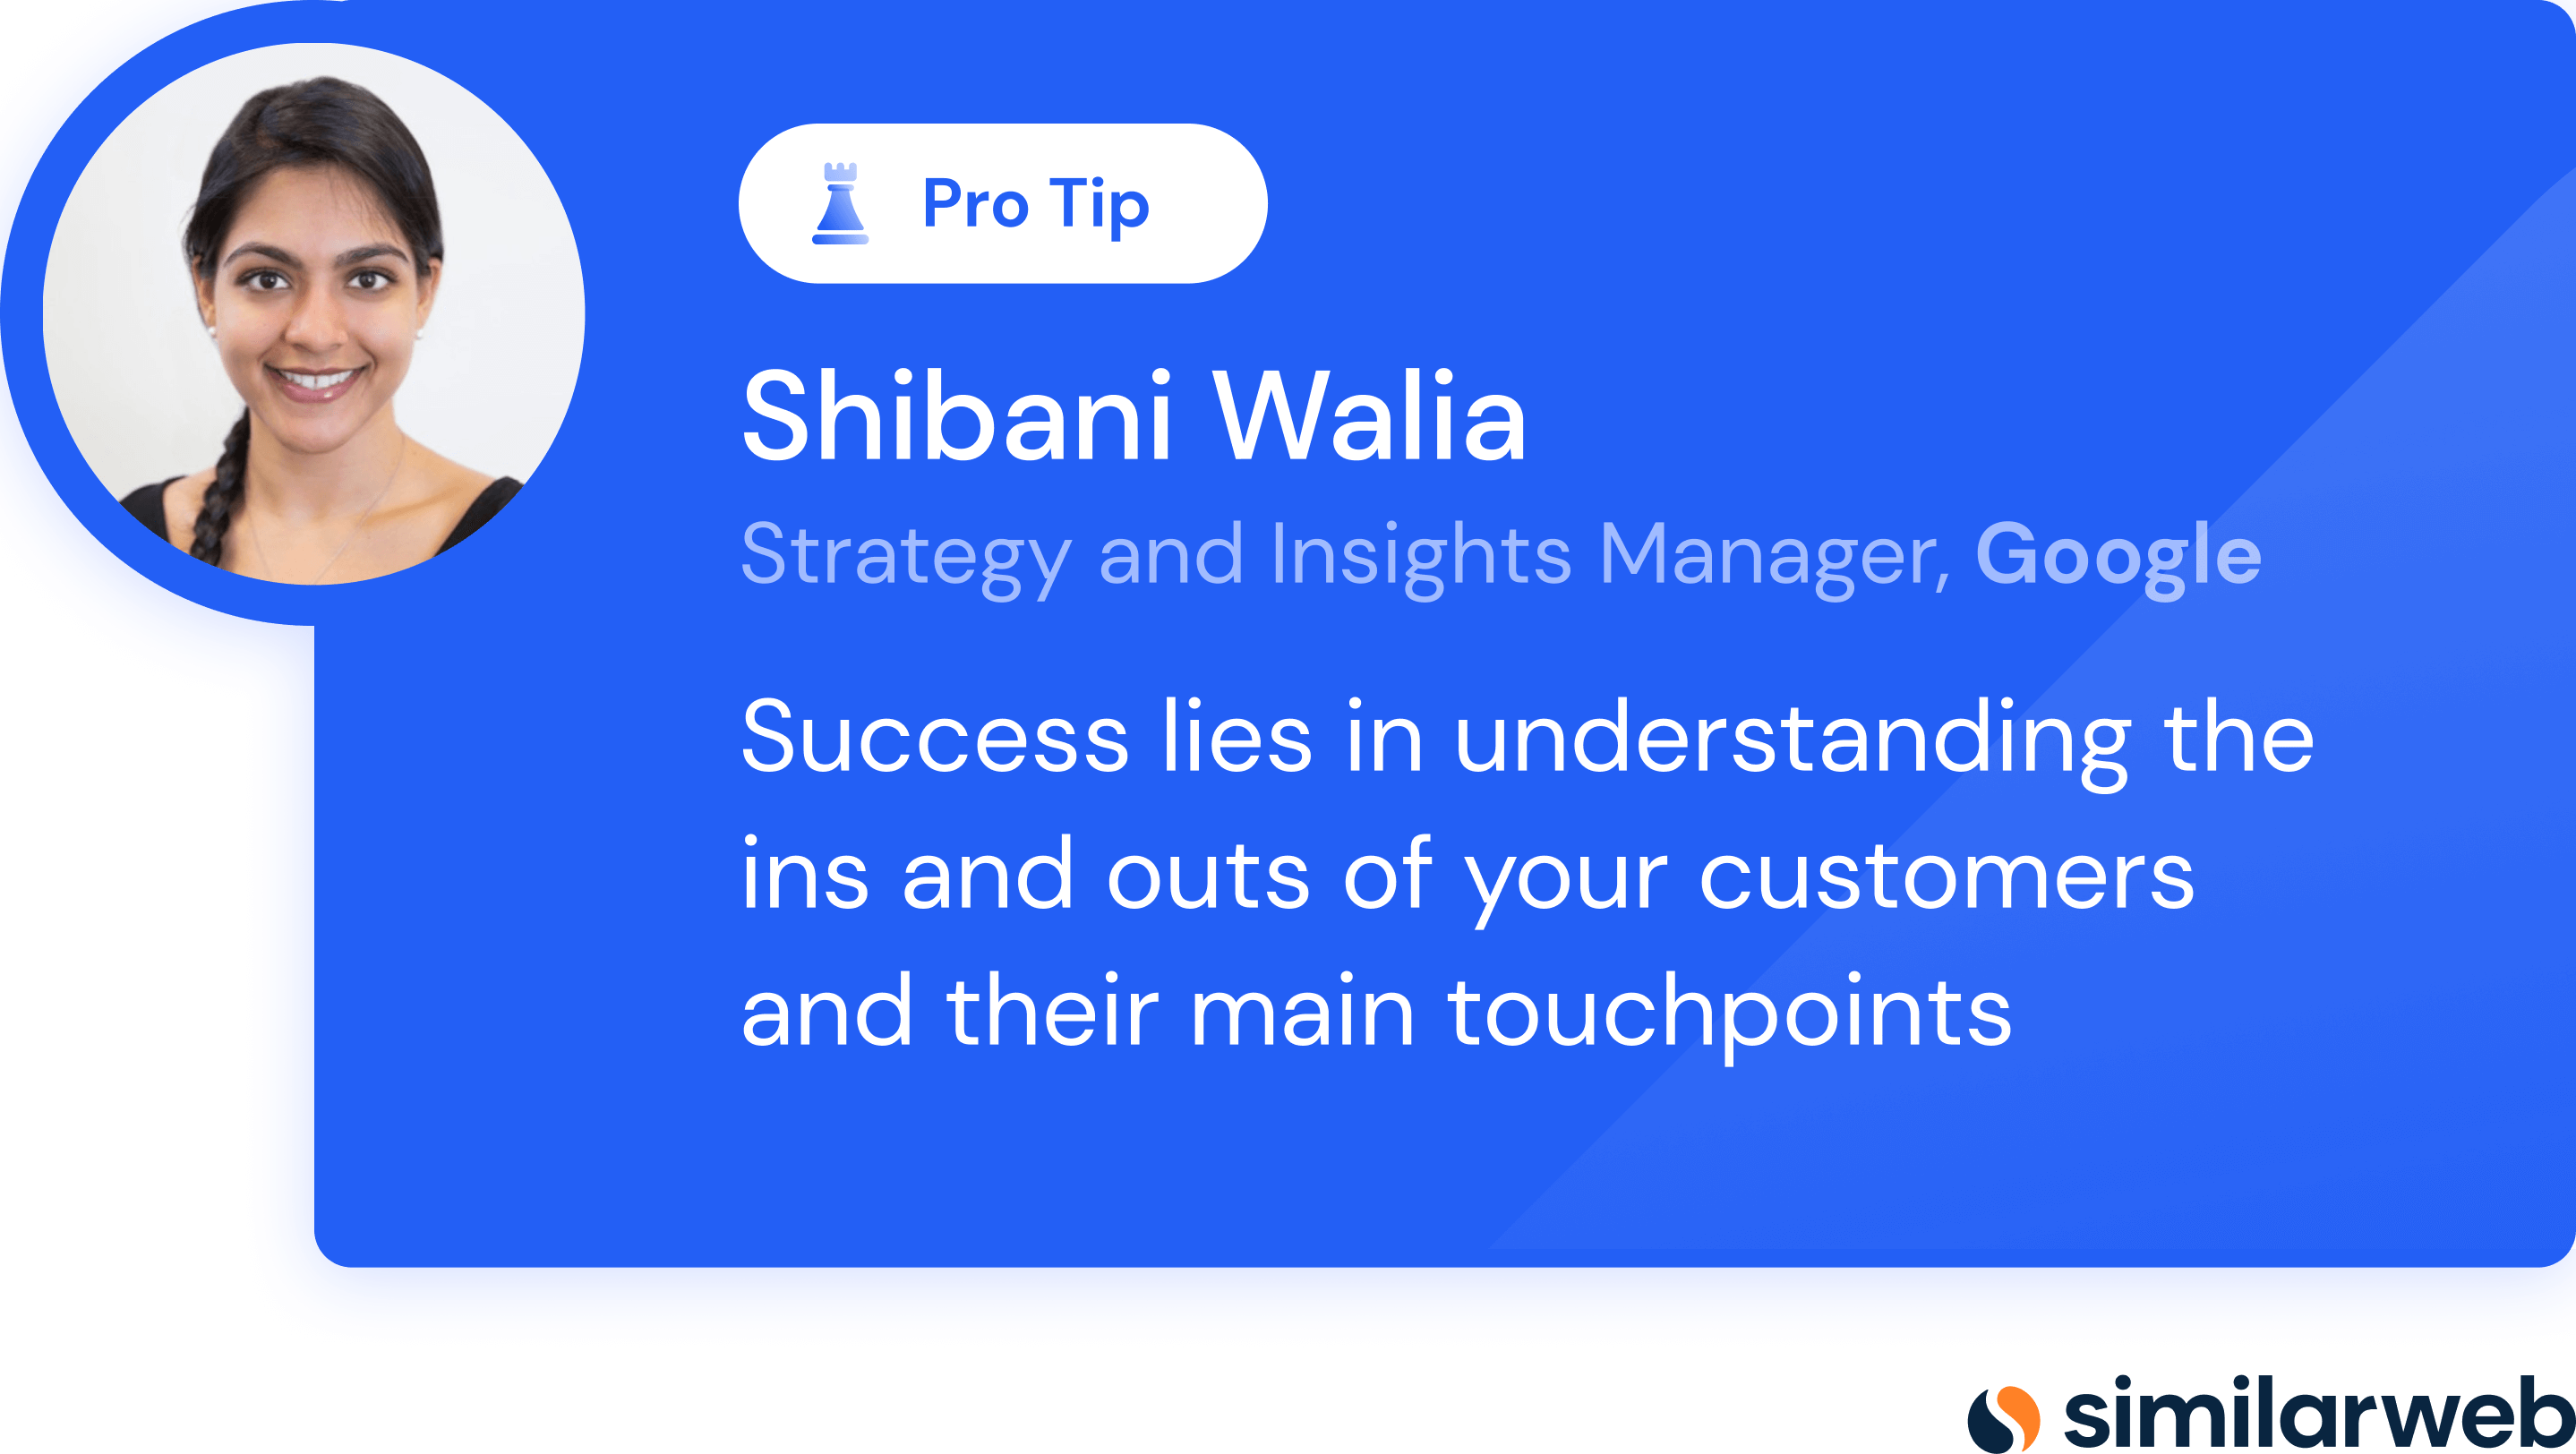 Pro tip from Shibani Walia, Strategy and Insights Manager, Google